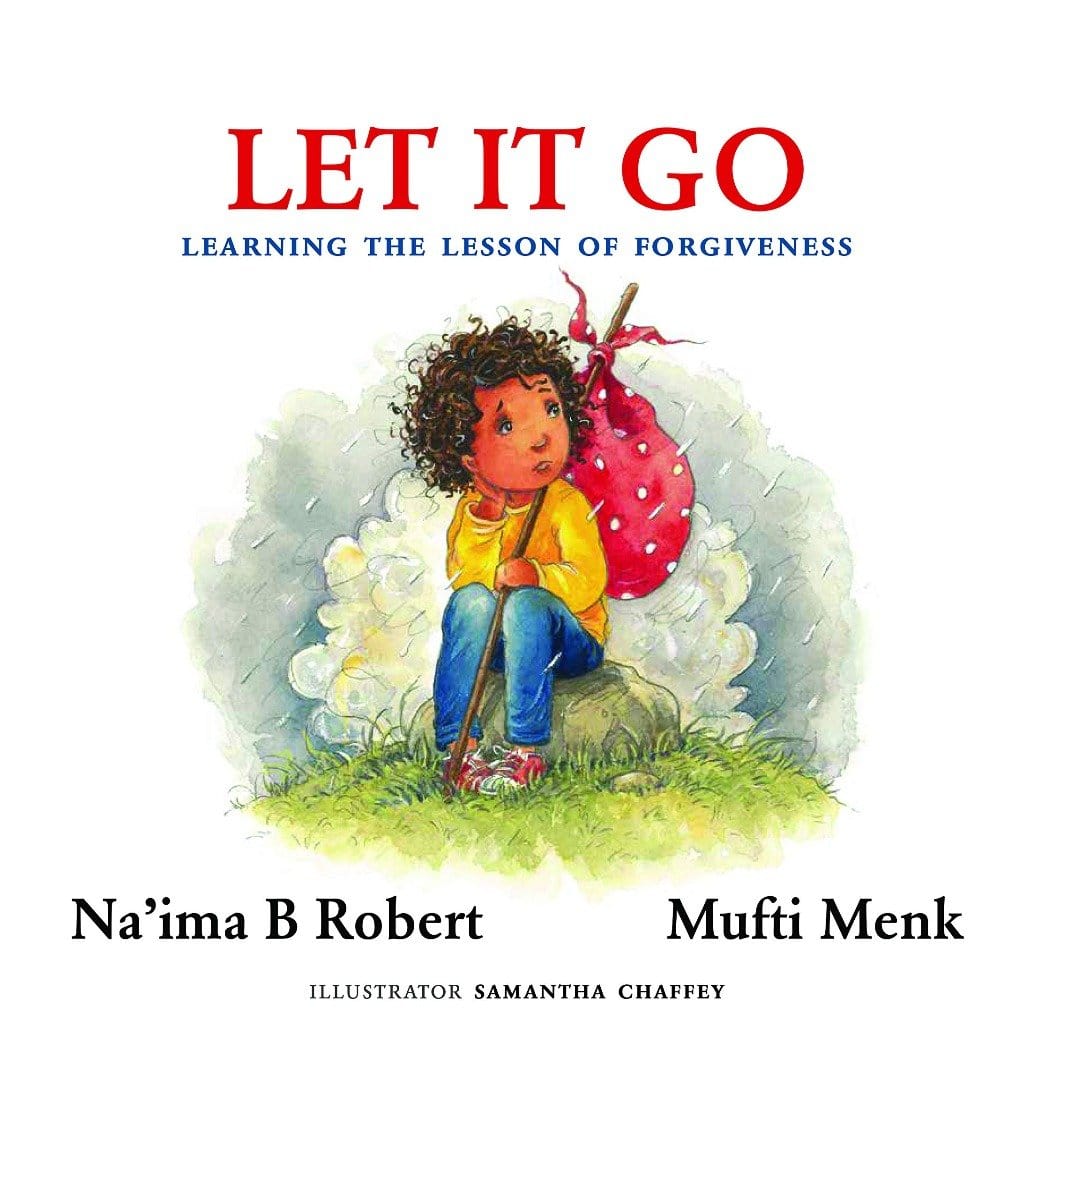 Let It Go - Learning The Lesson Of Forgiveness